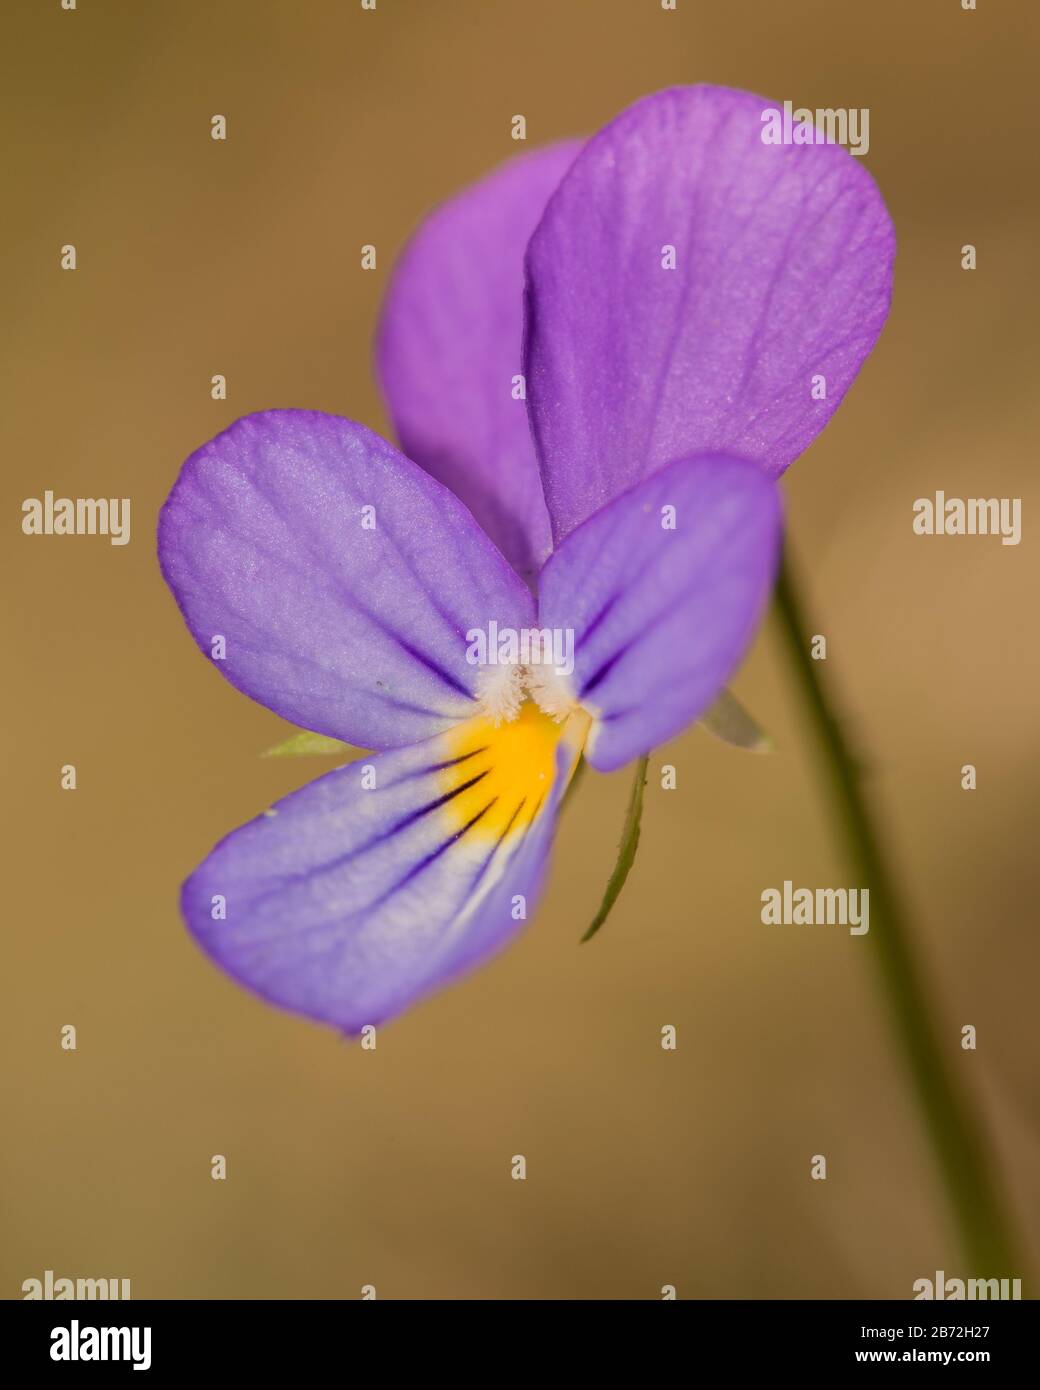 Viola tricolor, also known as Johnny Jump up, heartsease, heart's ease, heart's delight, tickle-my-fancy, Jack-jump-up-and-kiss-me, come-and-cuddle-me Stock Photo